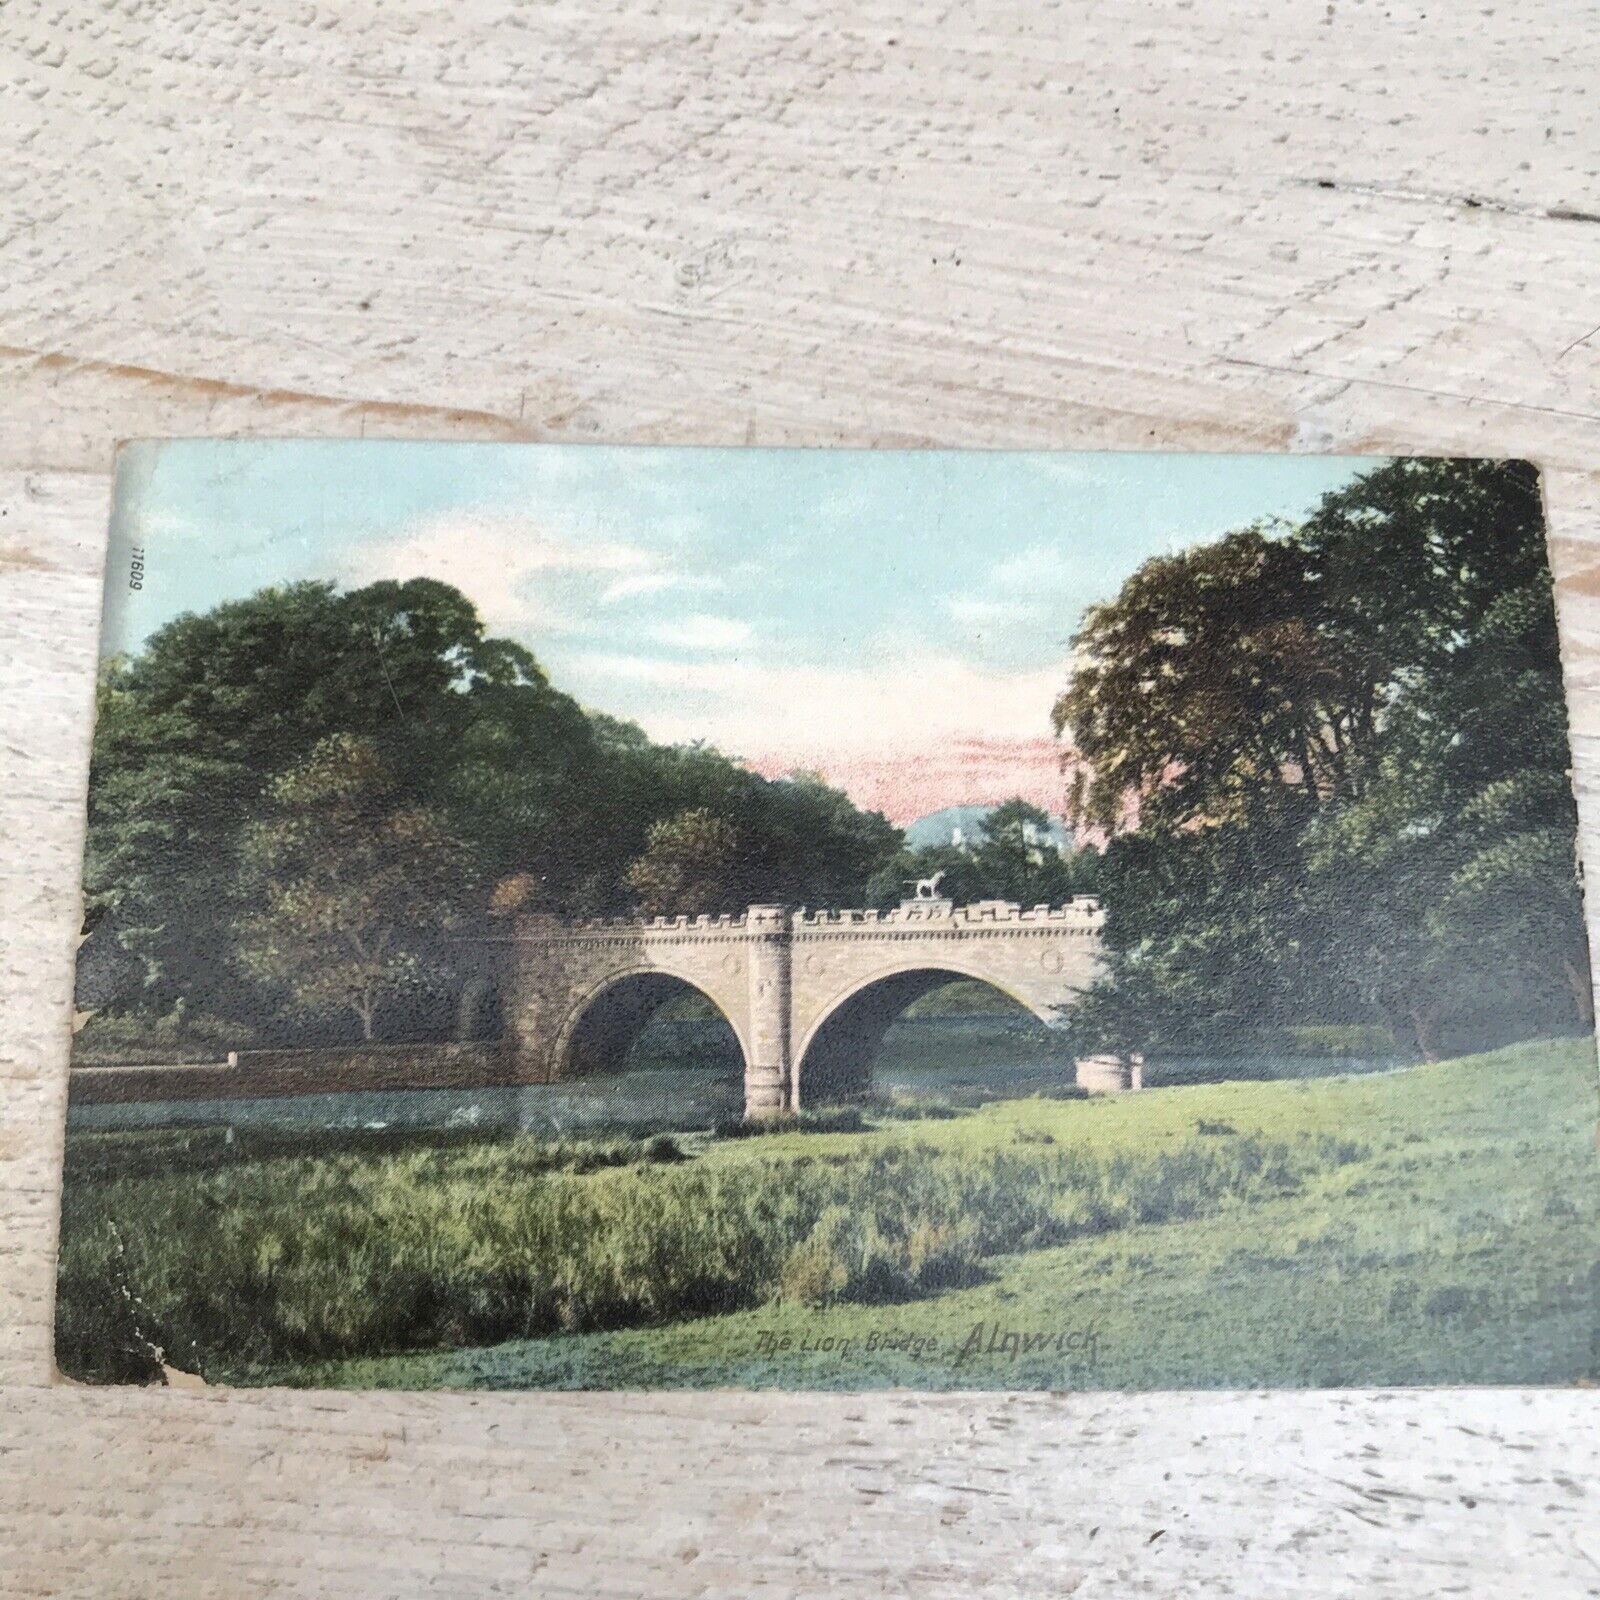 House Clearance - Used Service The Lion Bridge Alnwick. Postmark 1914 Wrench Series 11609